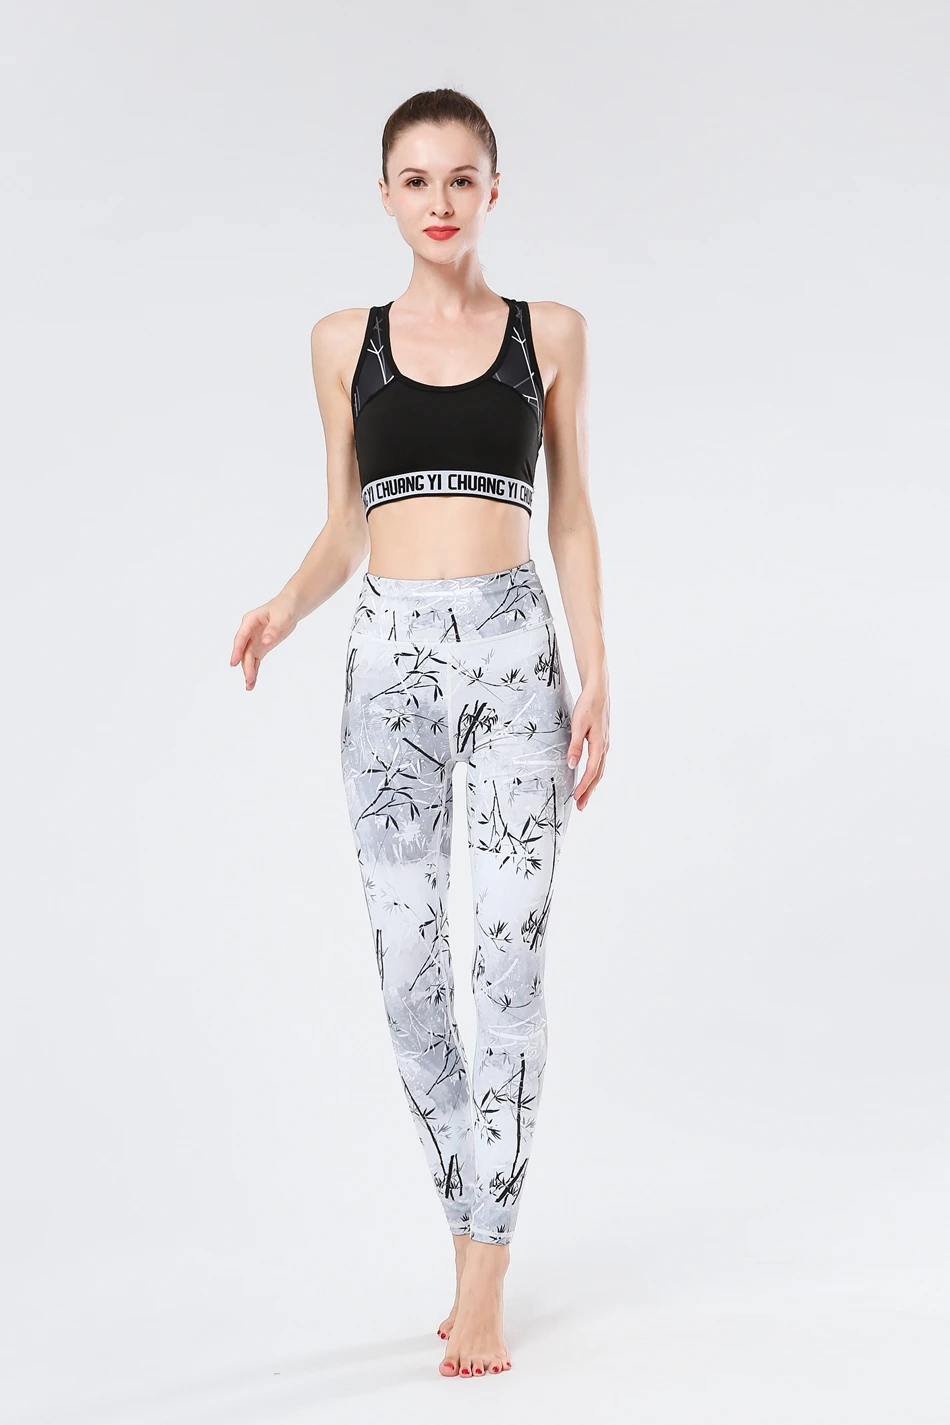 Floral gym leggings with awesome printed pattern